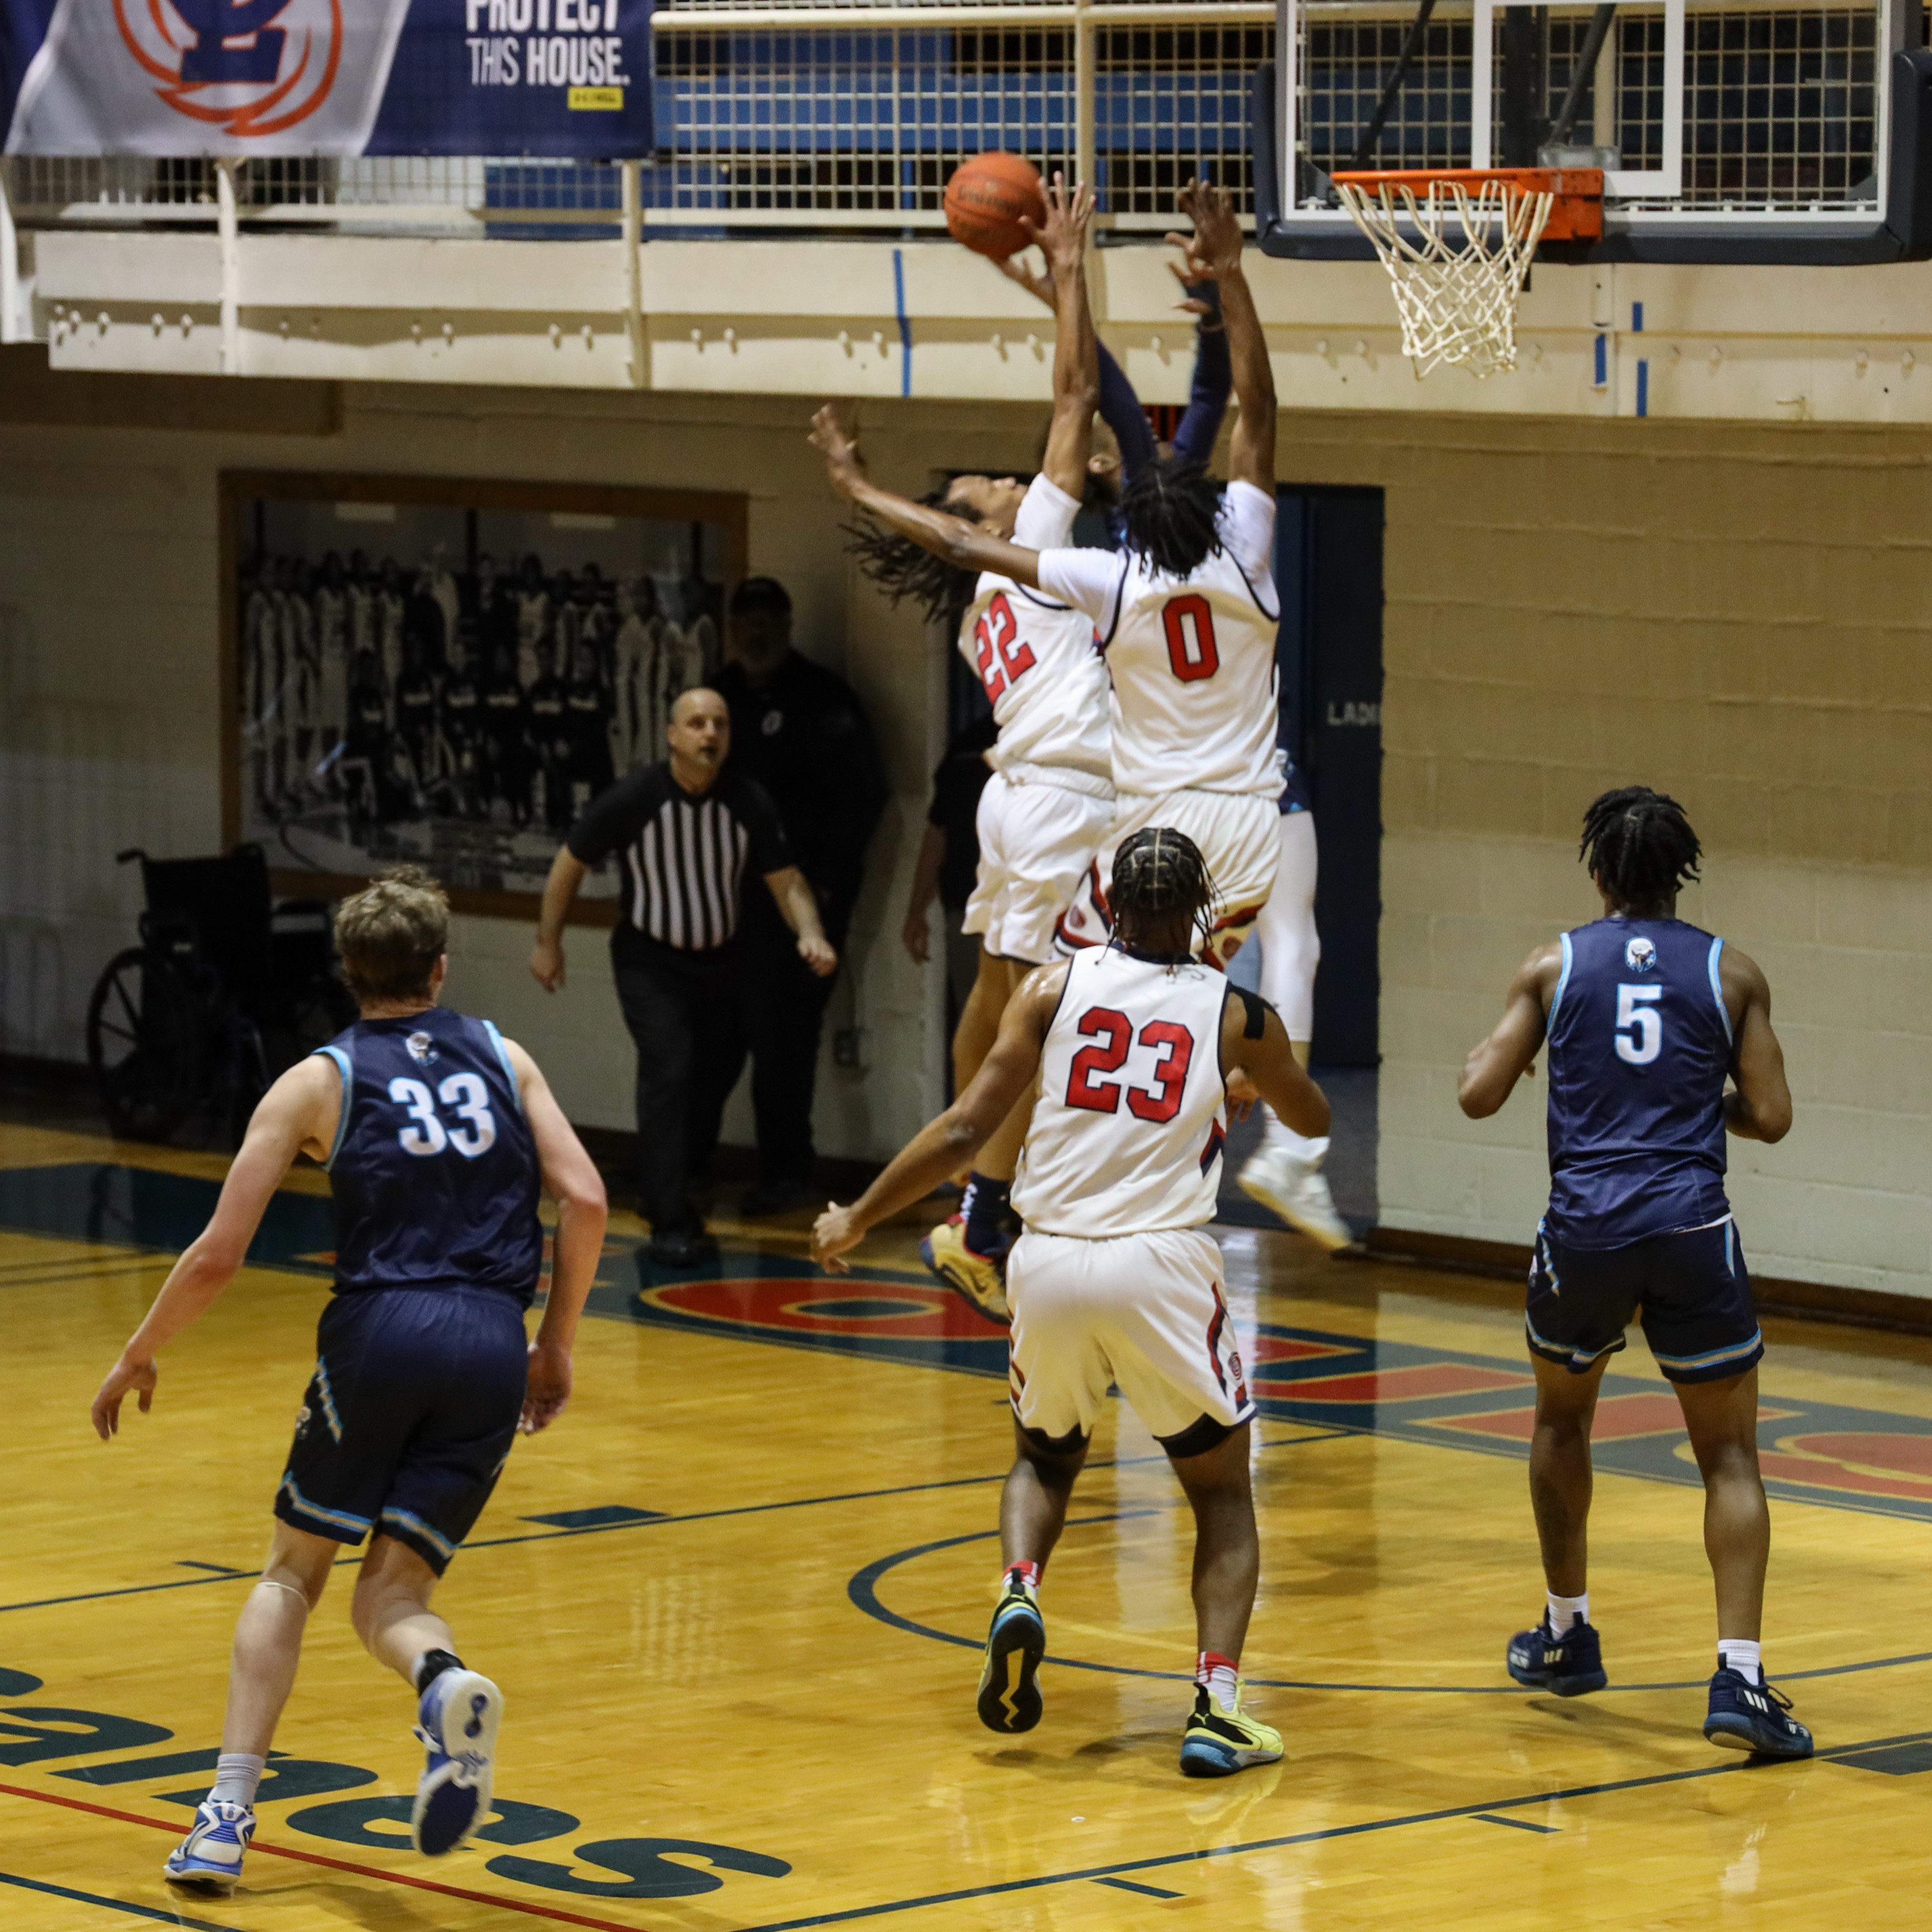 Men's Basketball players go up to block a lay-up.